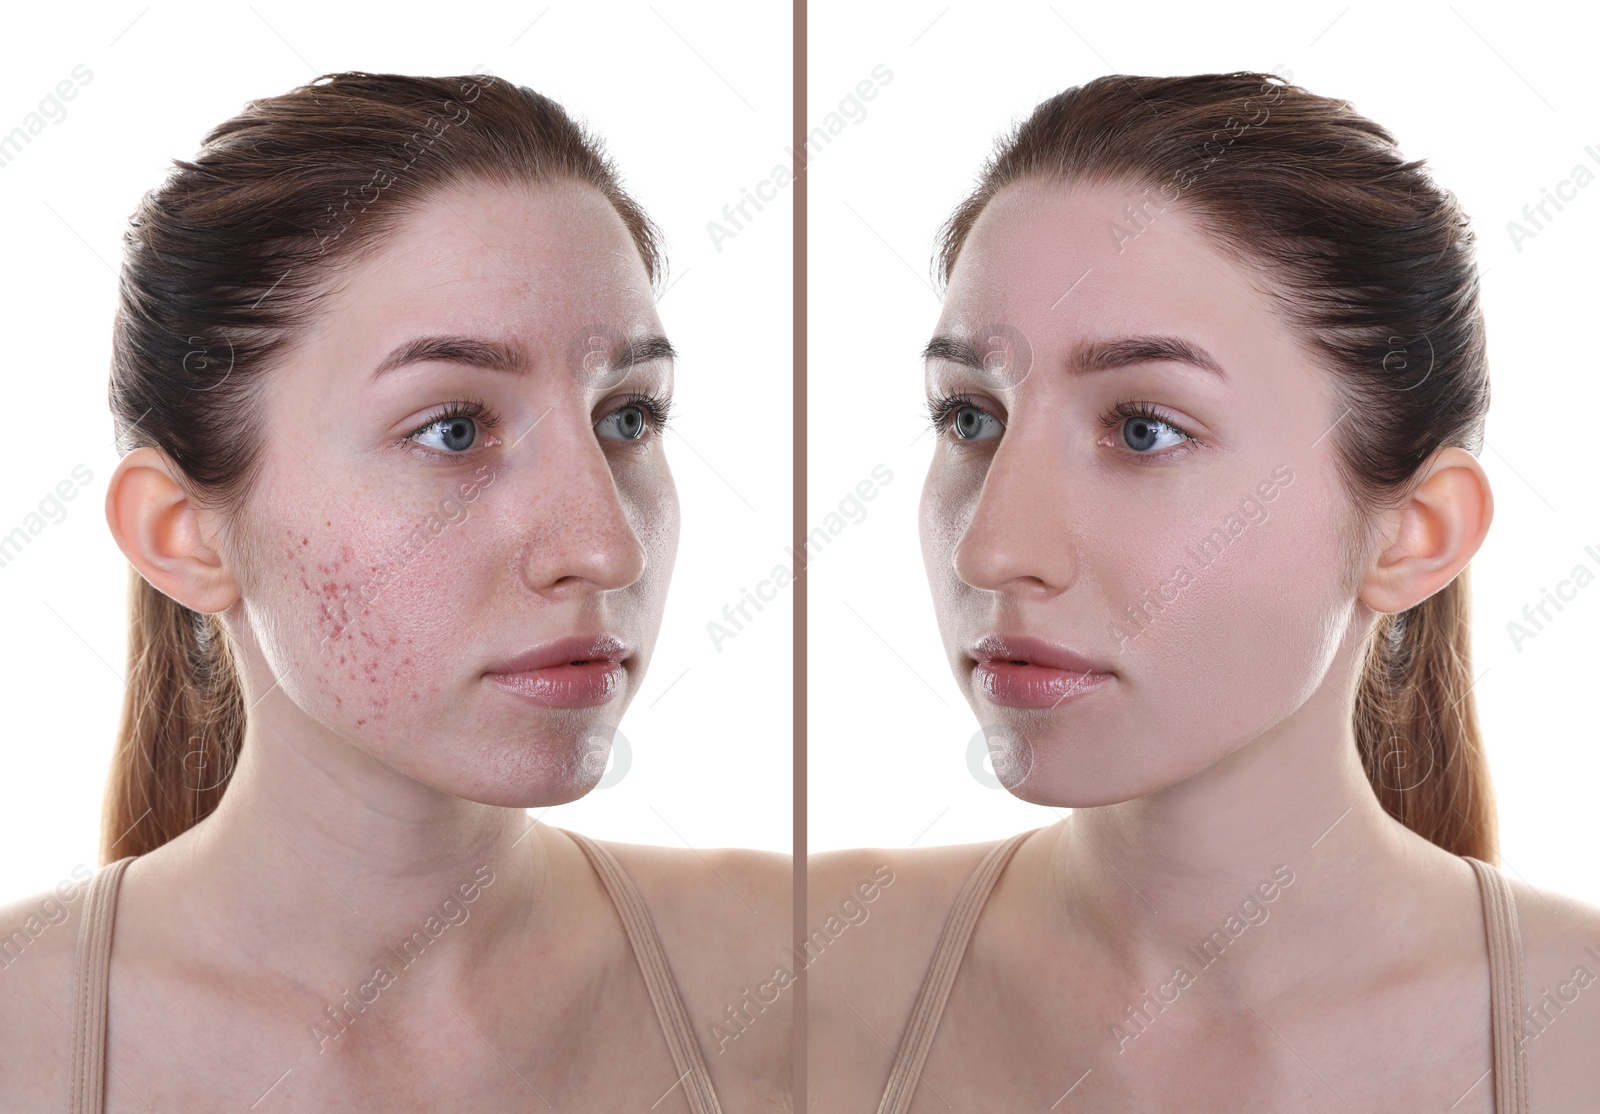 Image of Acne problem. Young woman before and after treatment on white background, collage of photos